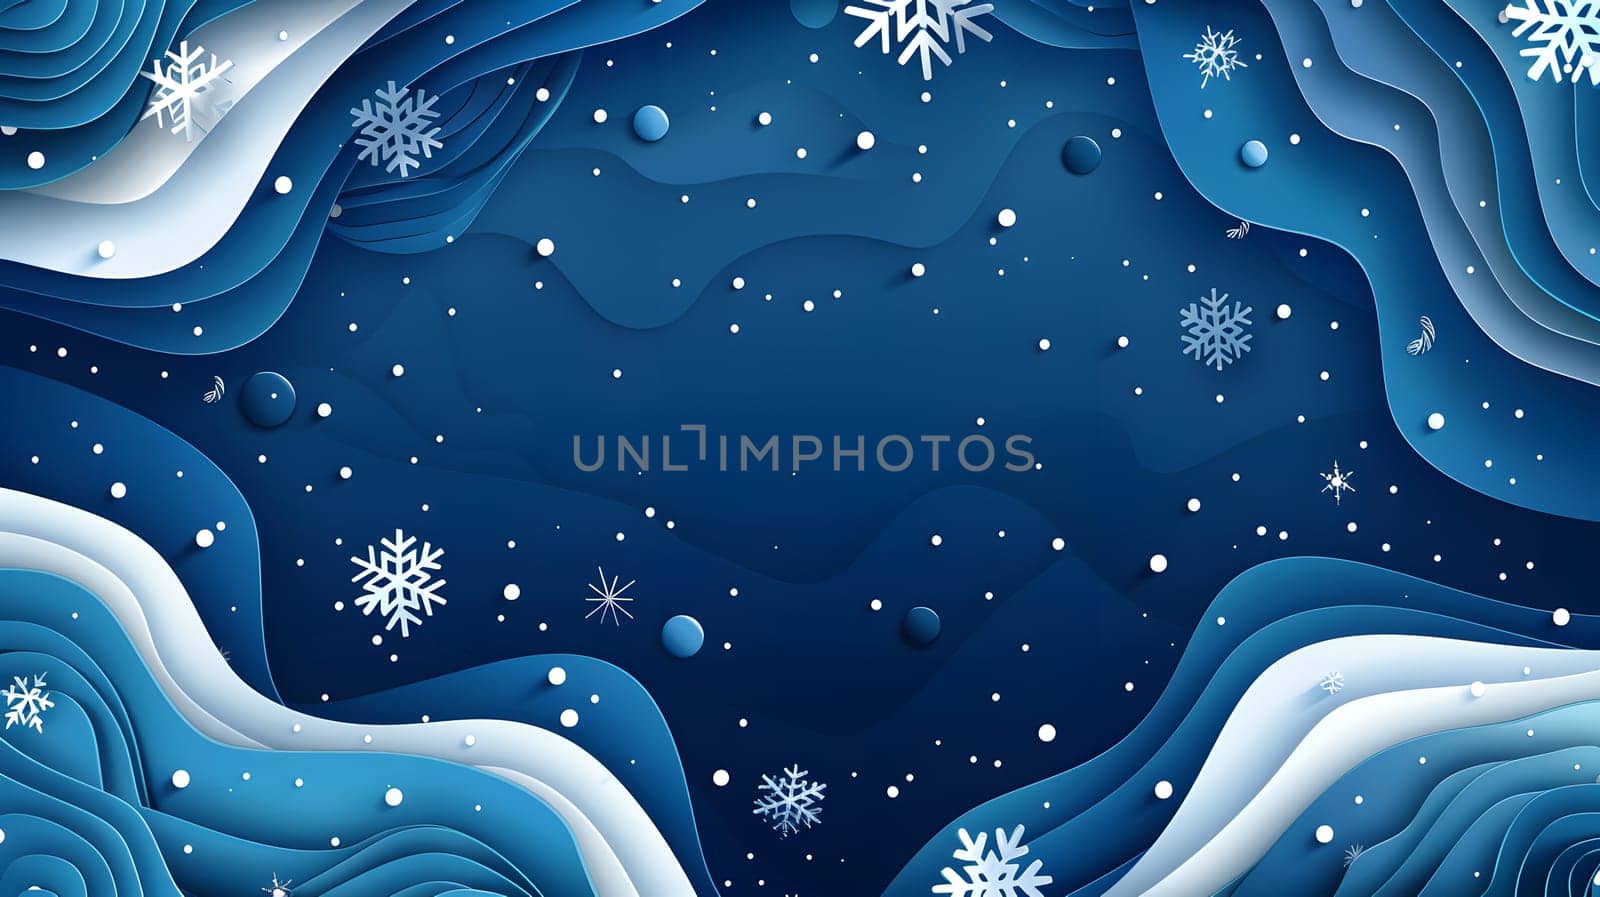 Electric blue waves with snowflakes on a liquid azure background by Nadtochiy